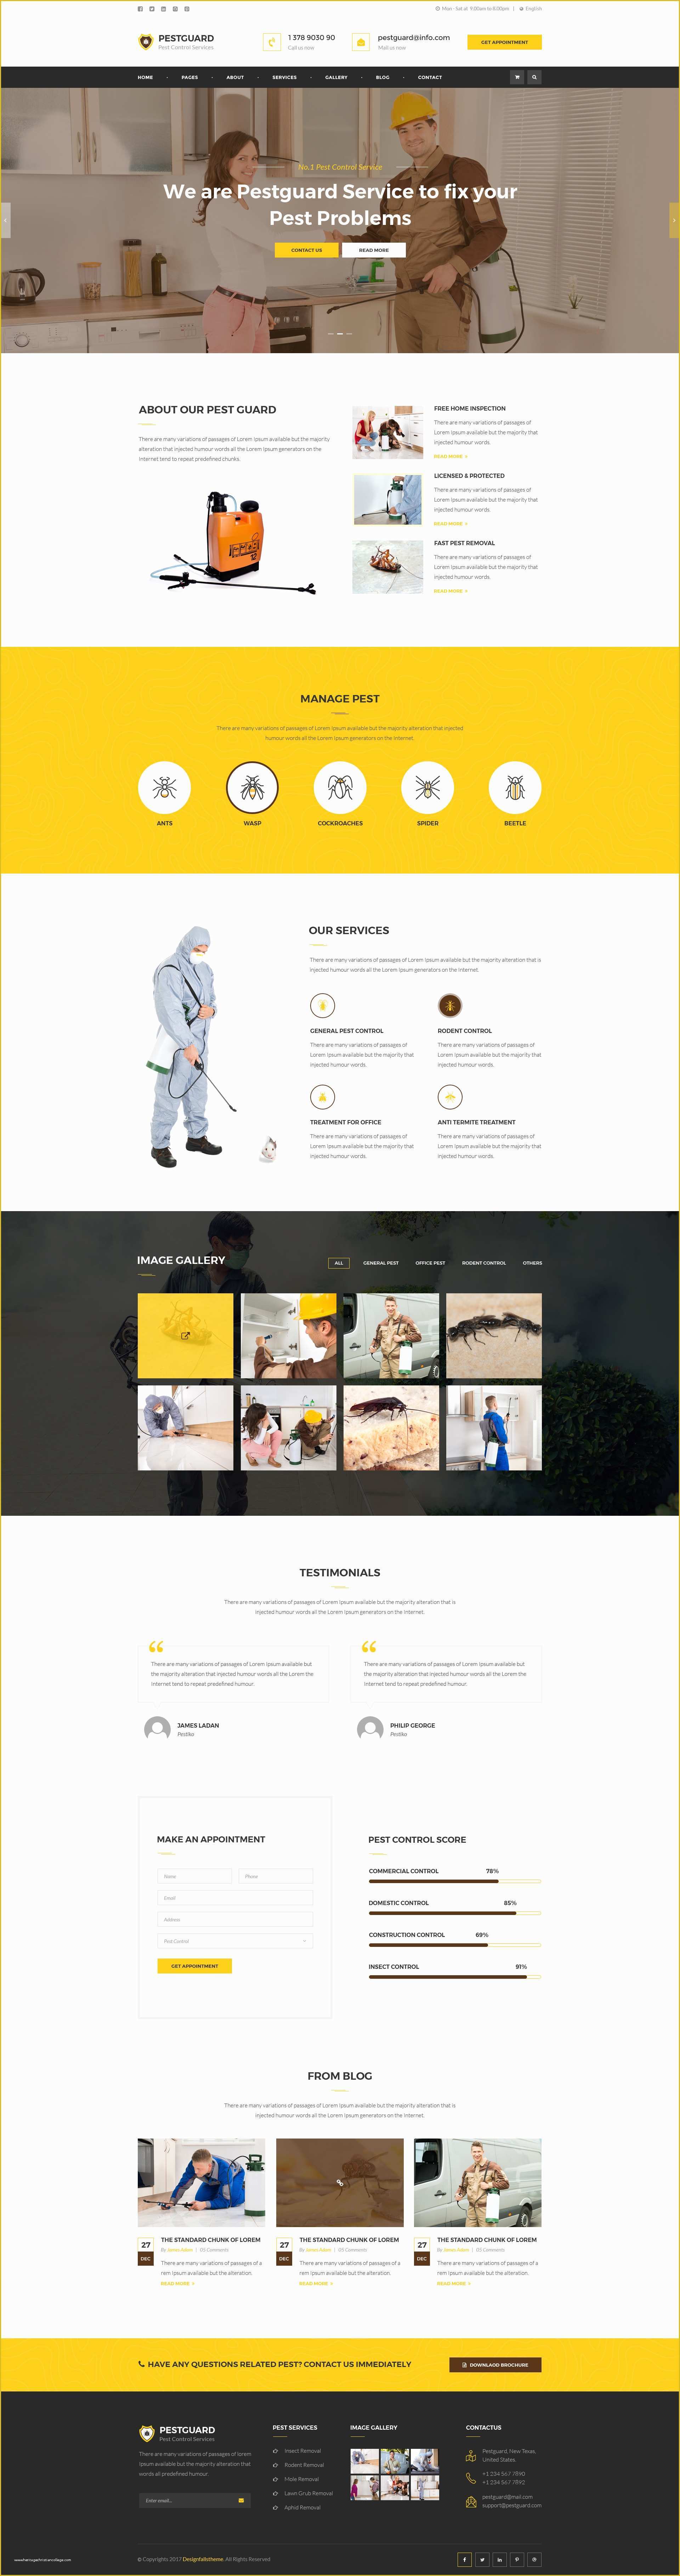 Pest Control Website Templates Free Download Of Pestguard Responsive Pest Control HTML Template by